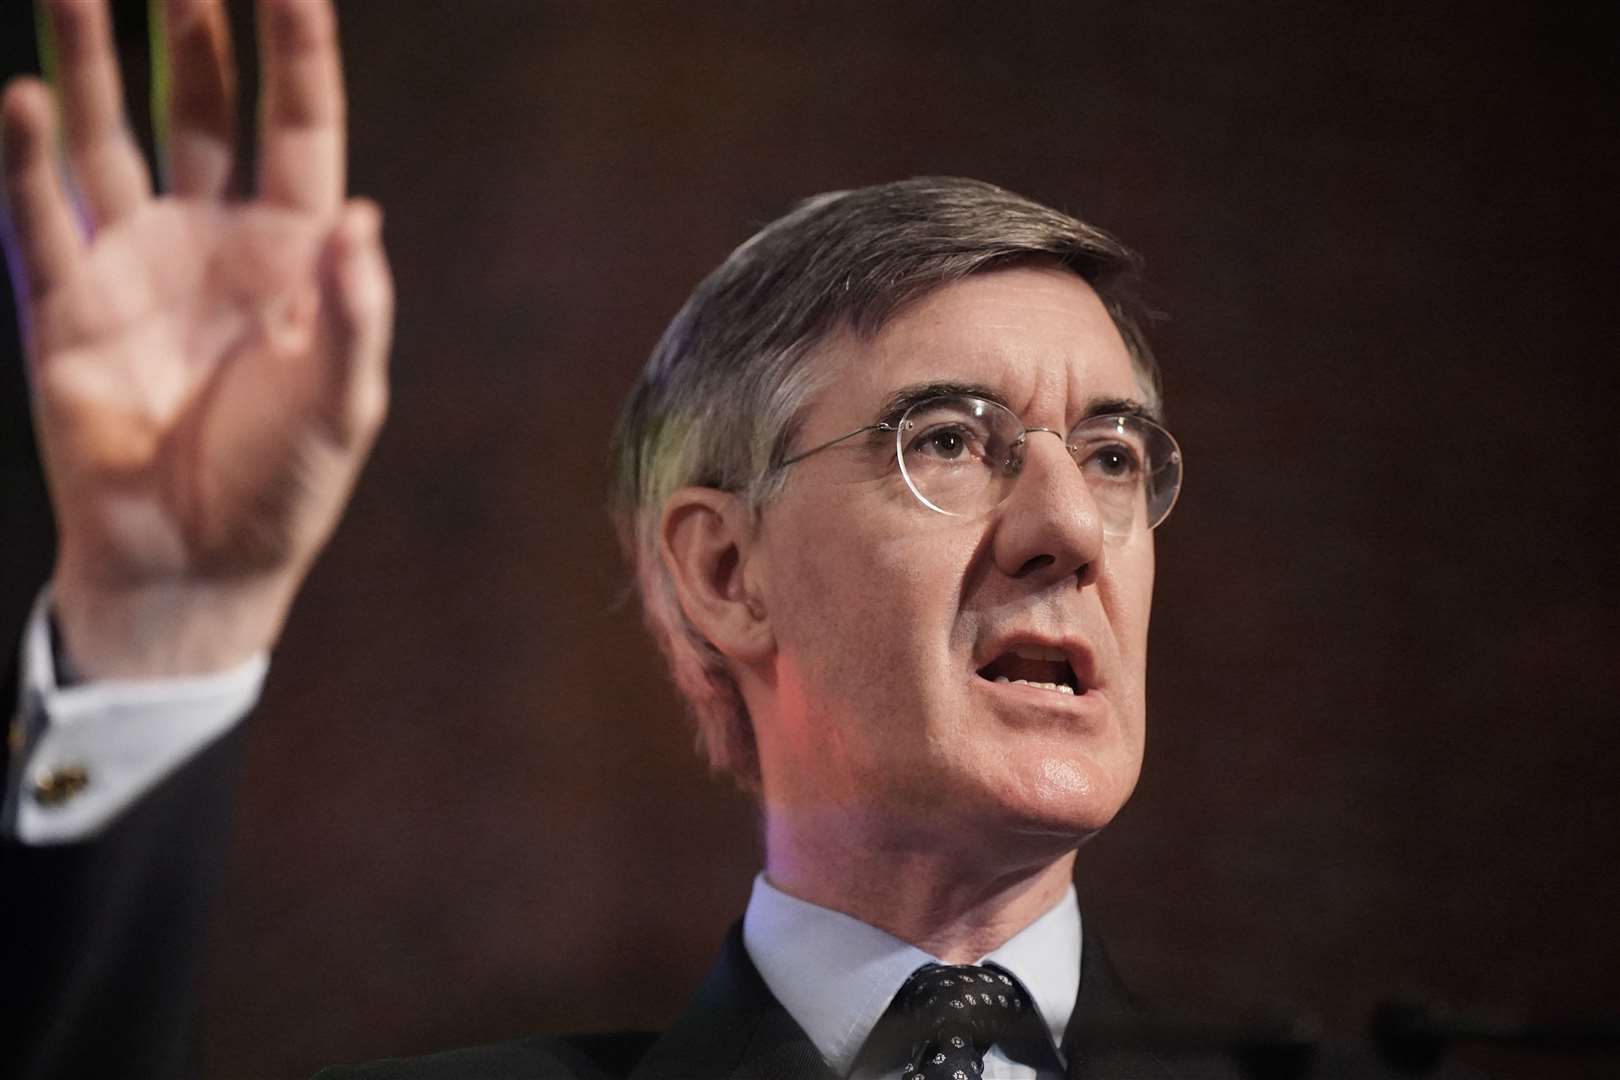 Former House of Commons leader Sir Jacob Rees-Mogg (Victoria Jones/PA)